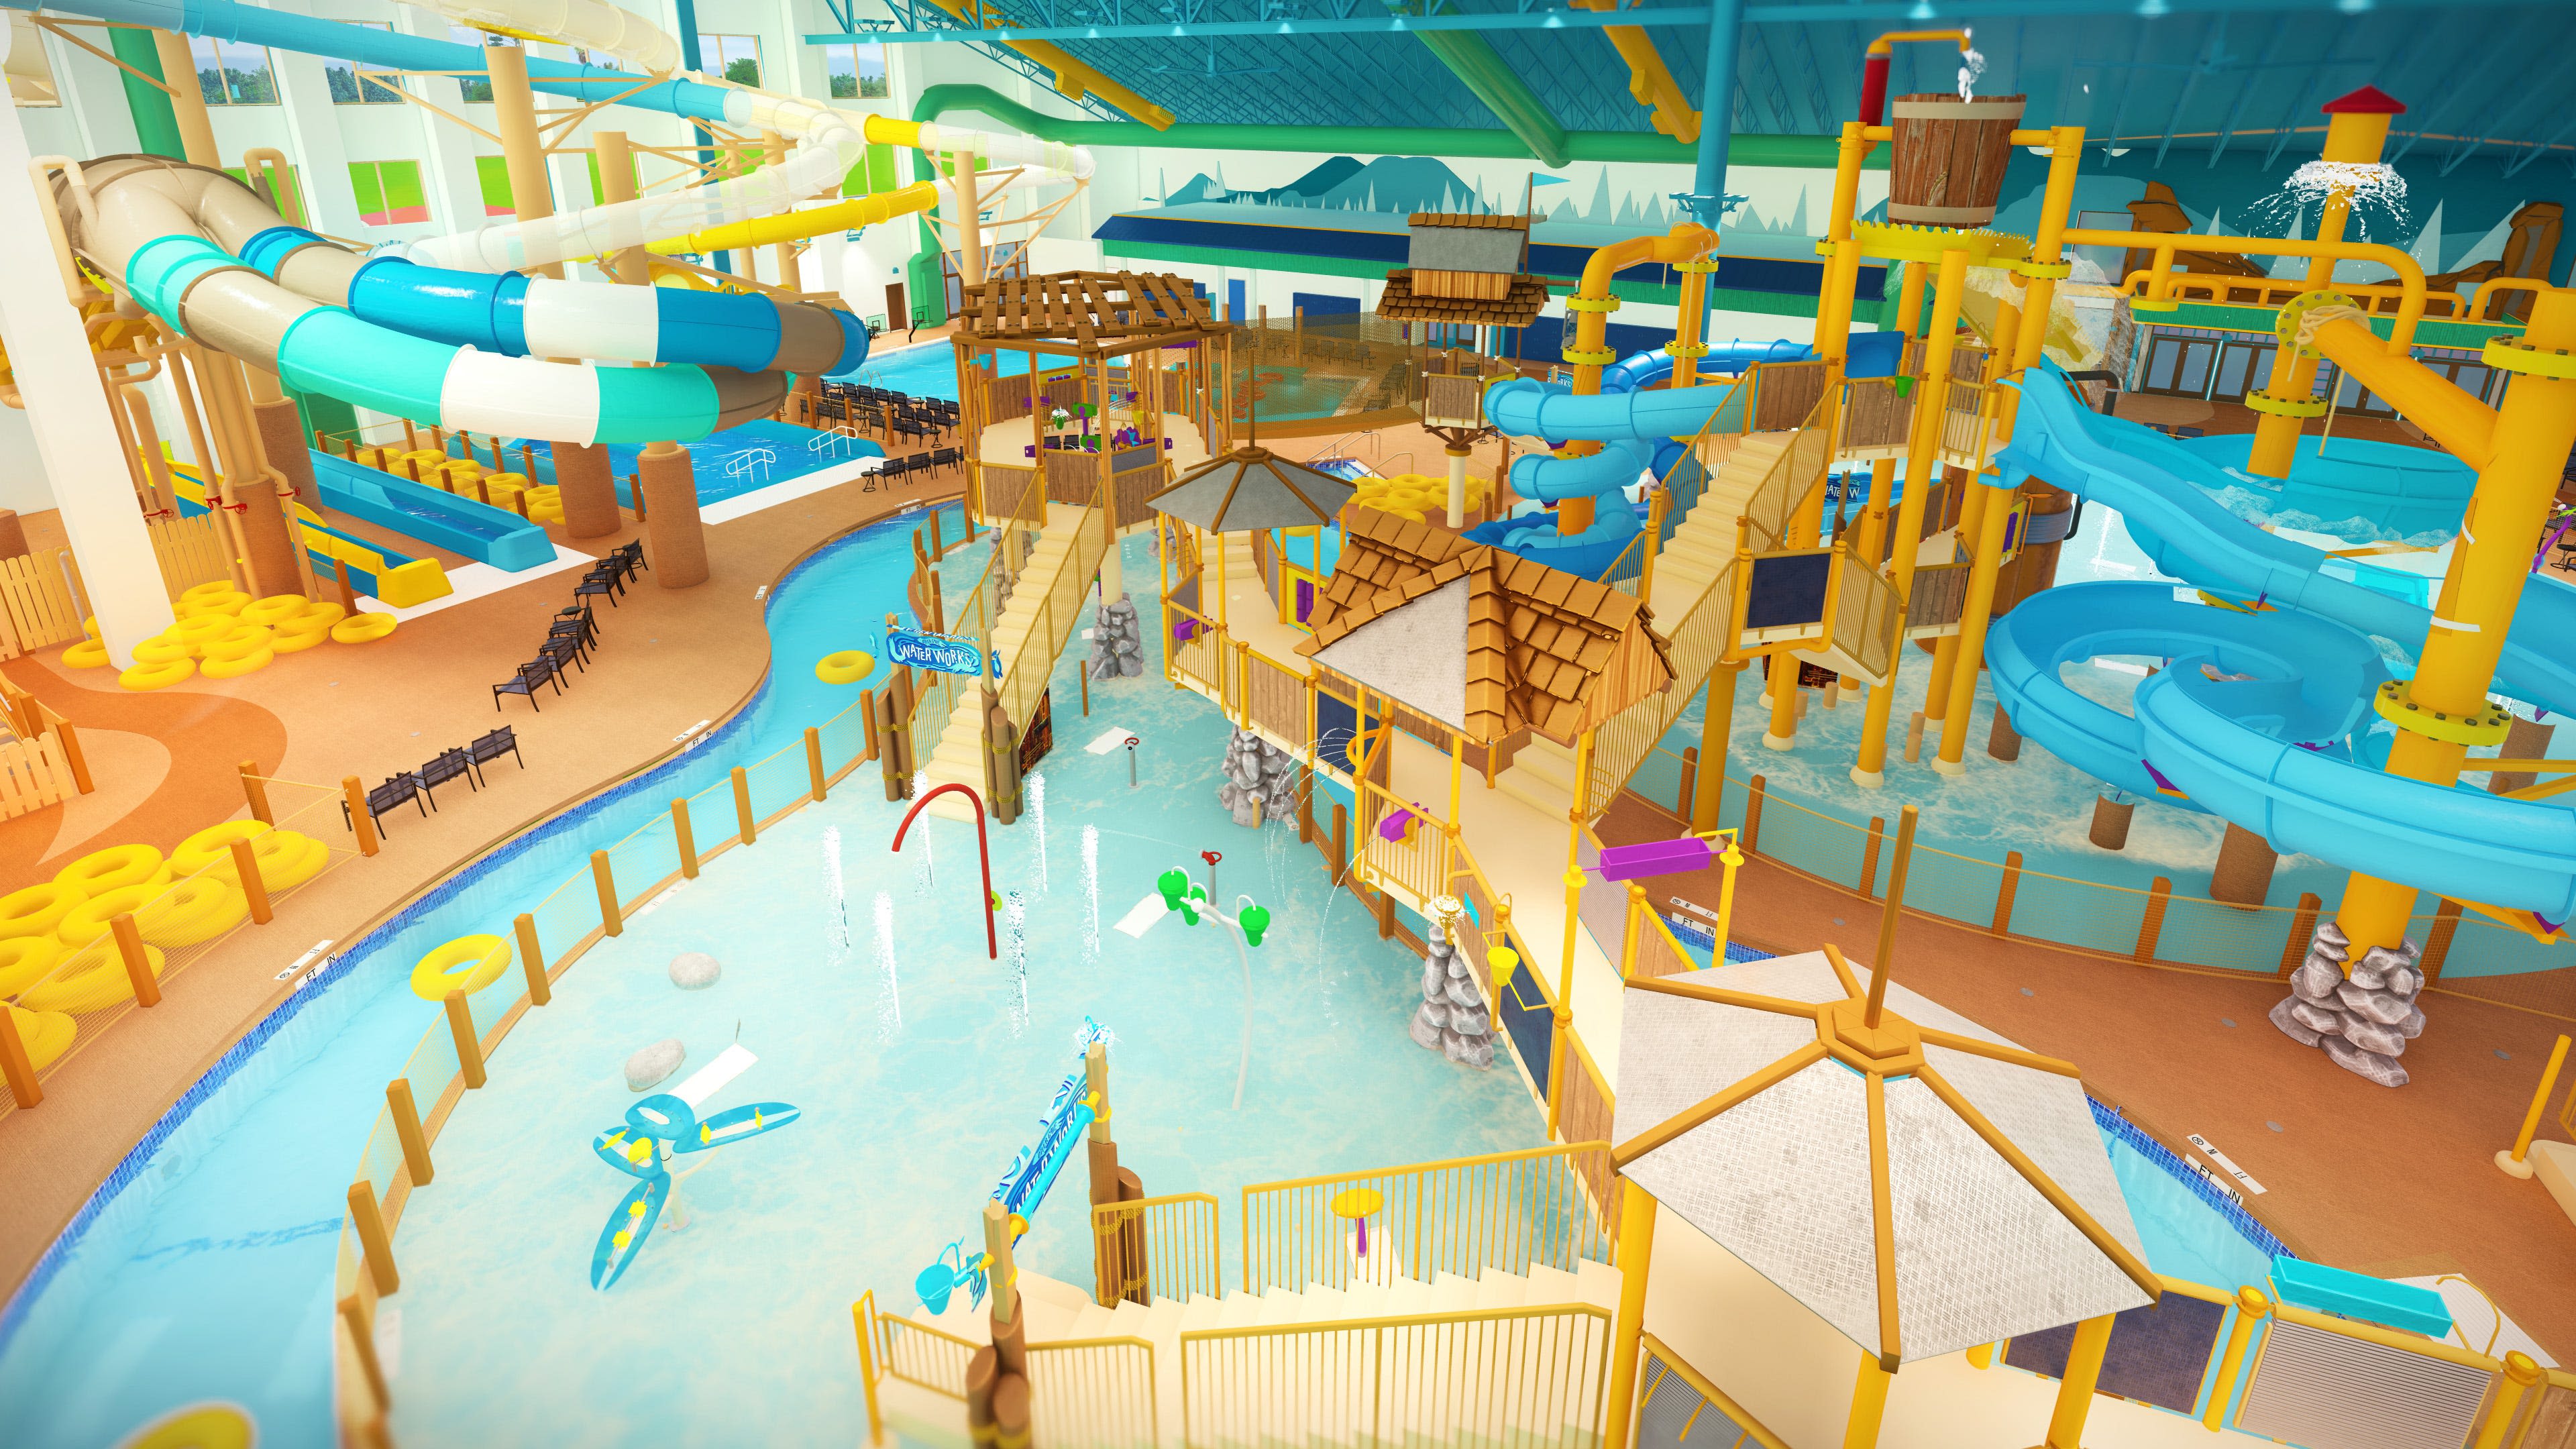 What are the water slides like at the new Florida Great Wolf Lodge? Take a look